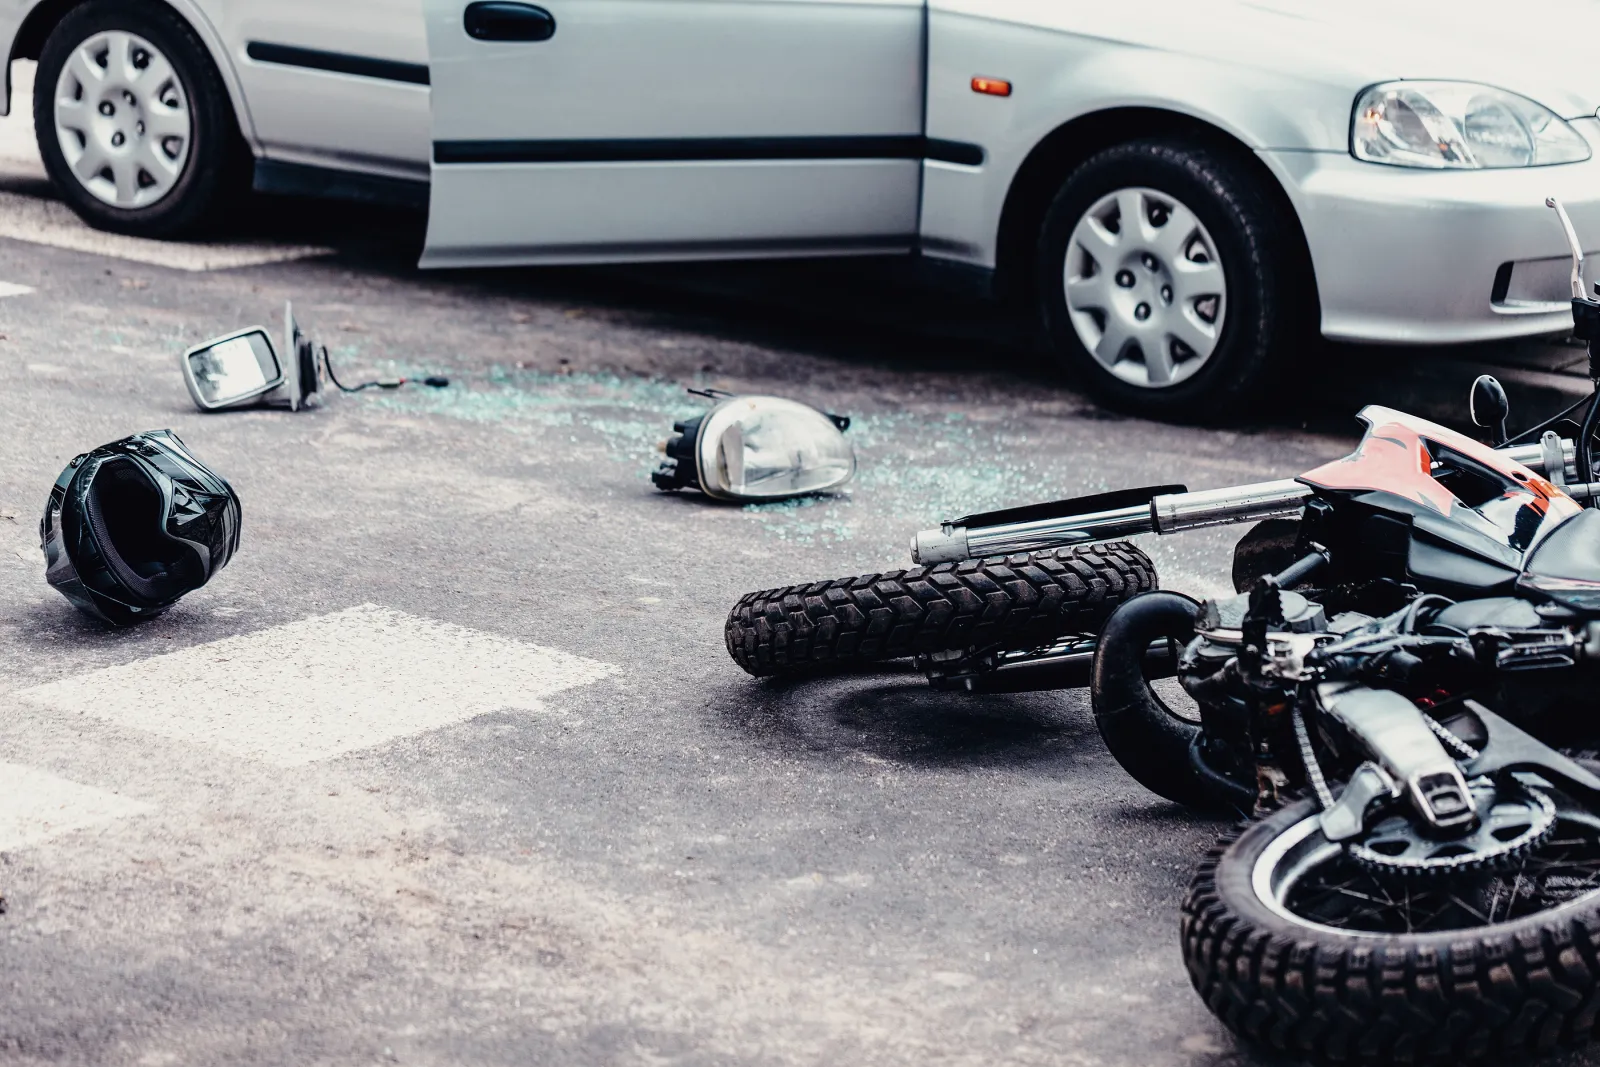  If I'm Not Wearing a Helmet in a Motorcycle Crash, Is It Comparative Negligence?